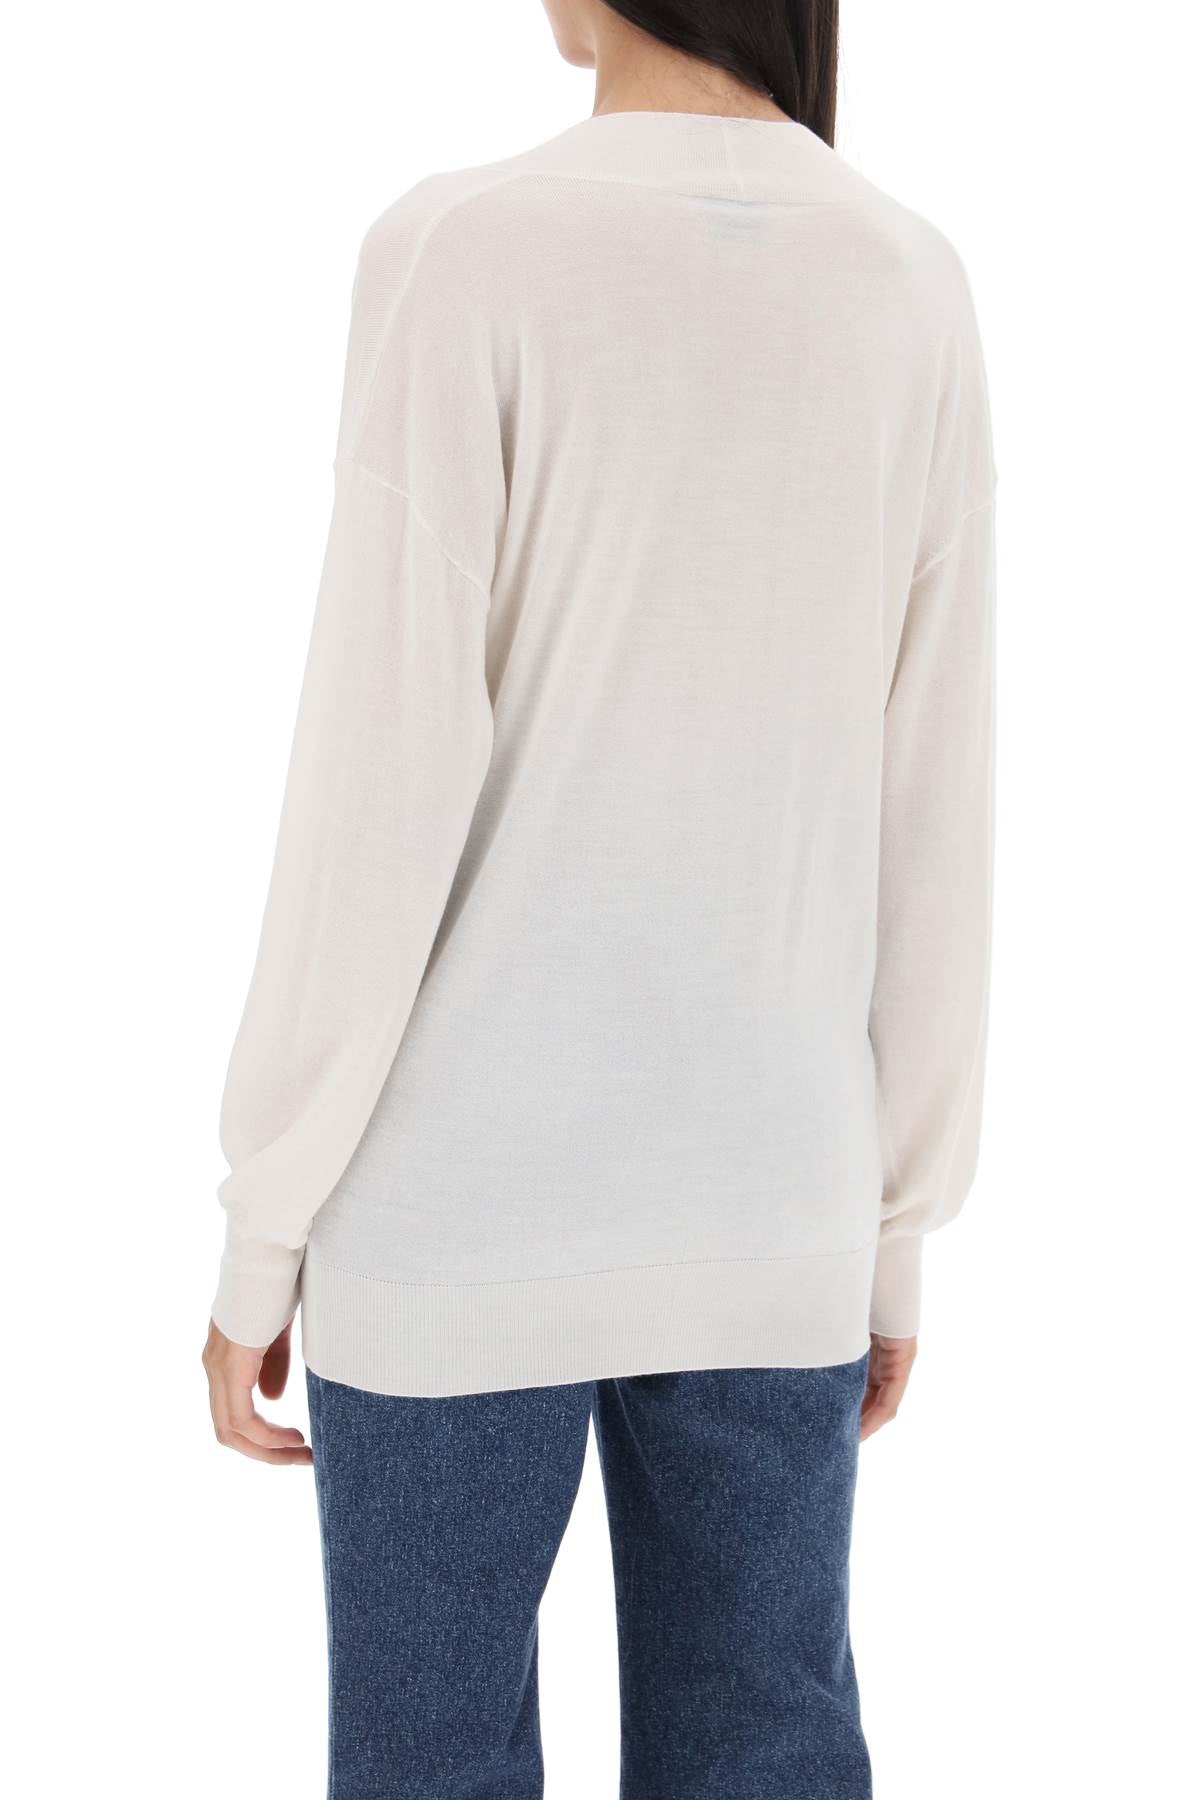 TOM FORD Cozy White Cashmere and Silk Sweater for Women - FW23 Collection